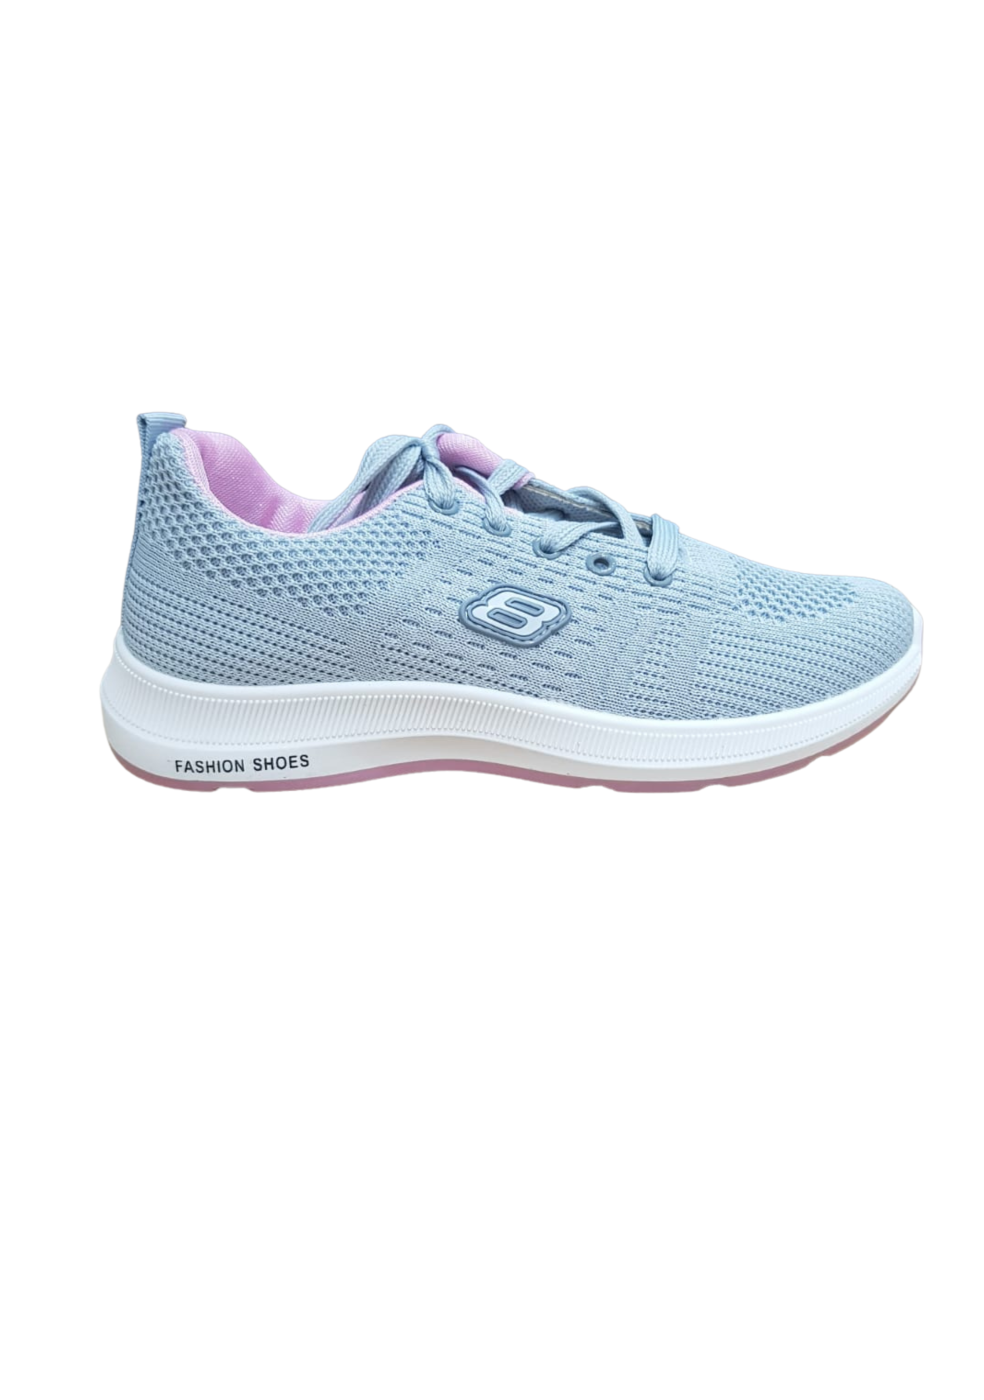 Casual Sneaker Shoes For Women